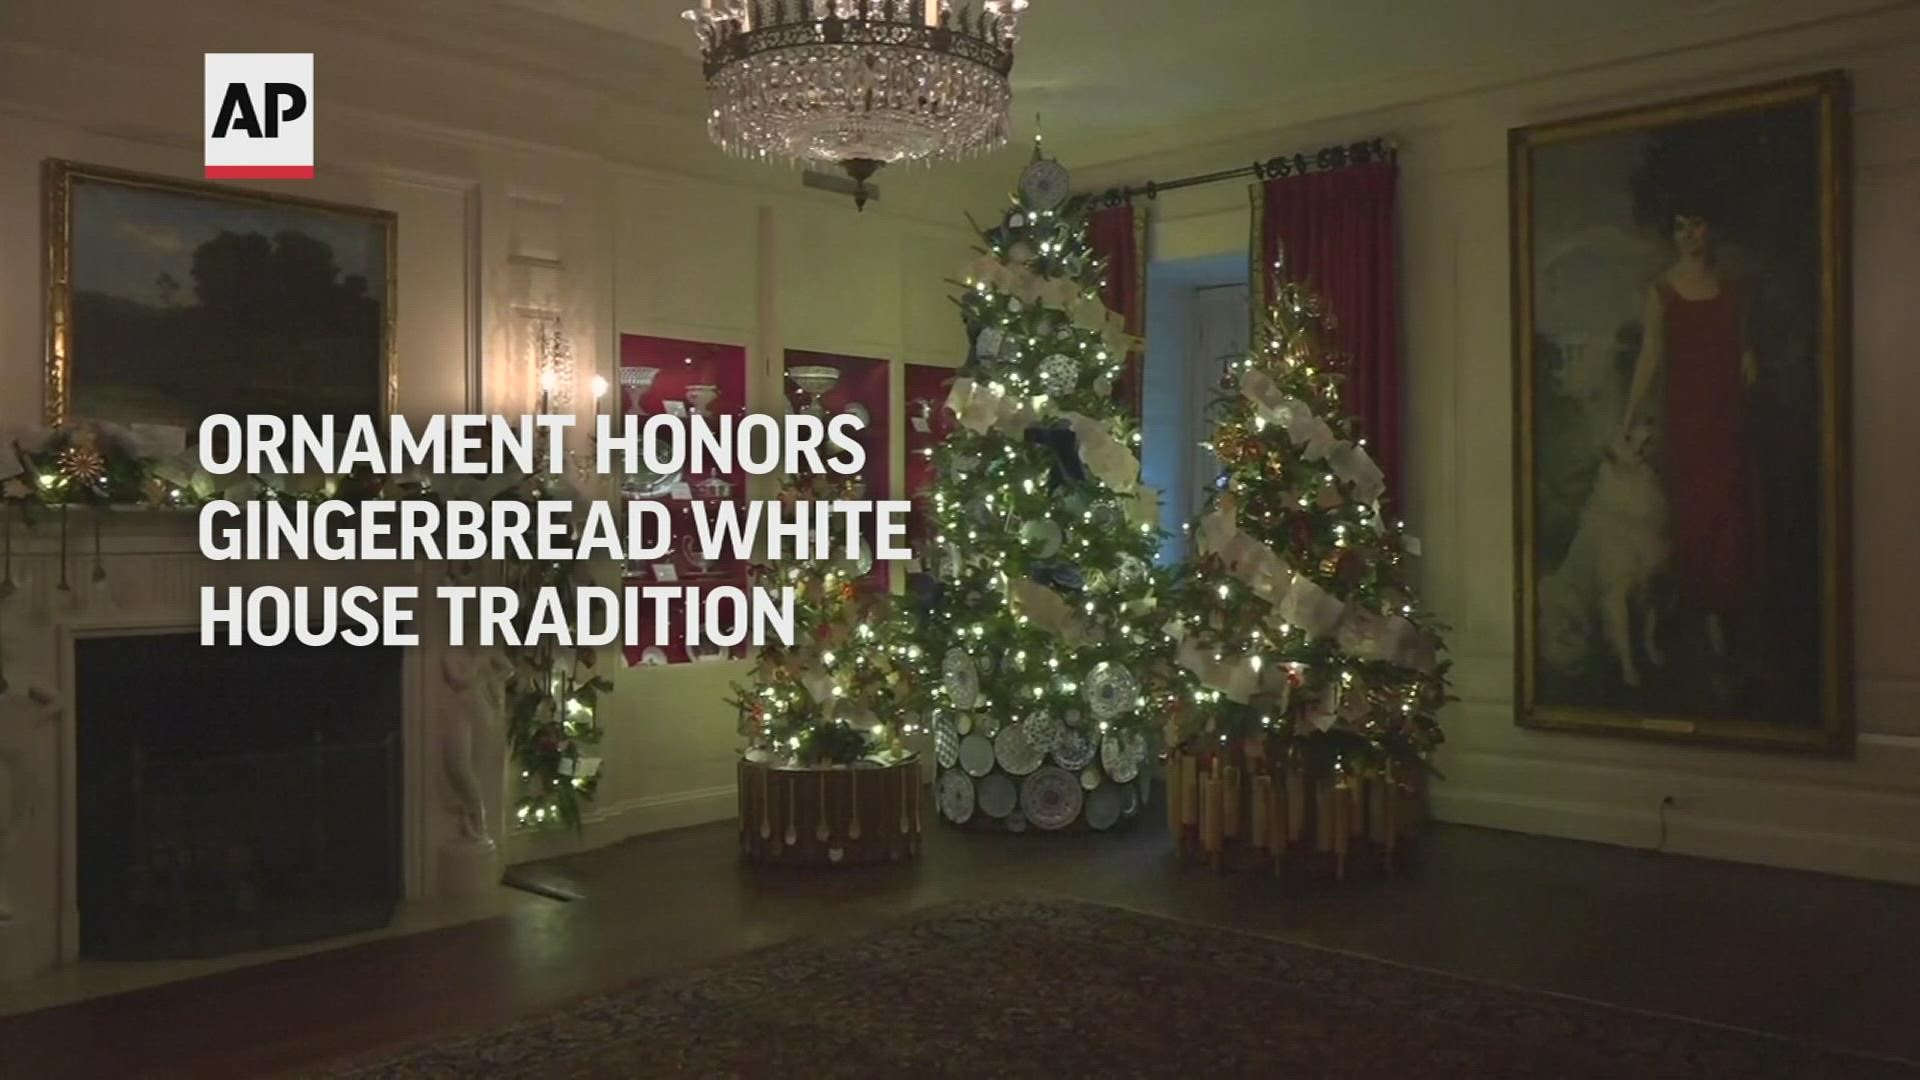 Every year since 1981 the White House historical association has designed an ornament honoring a president or key anniversary.